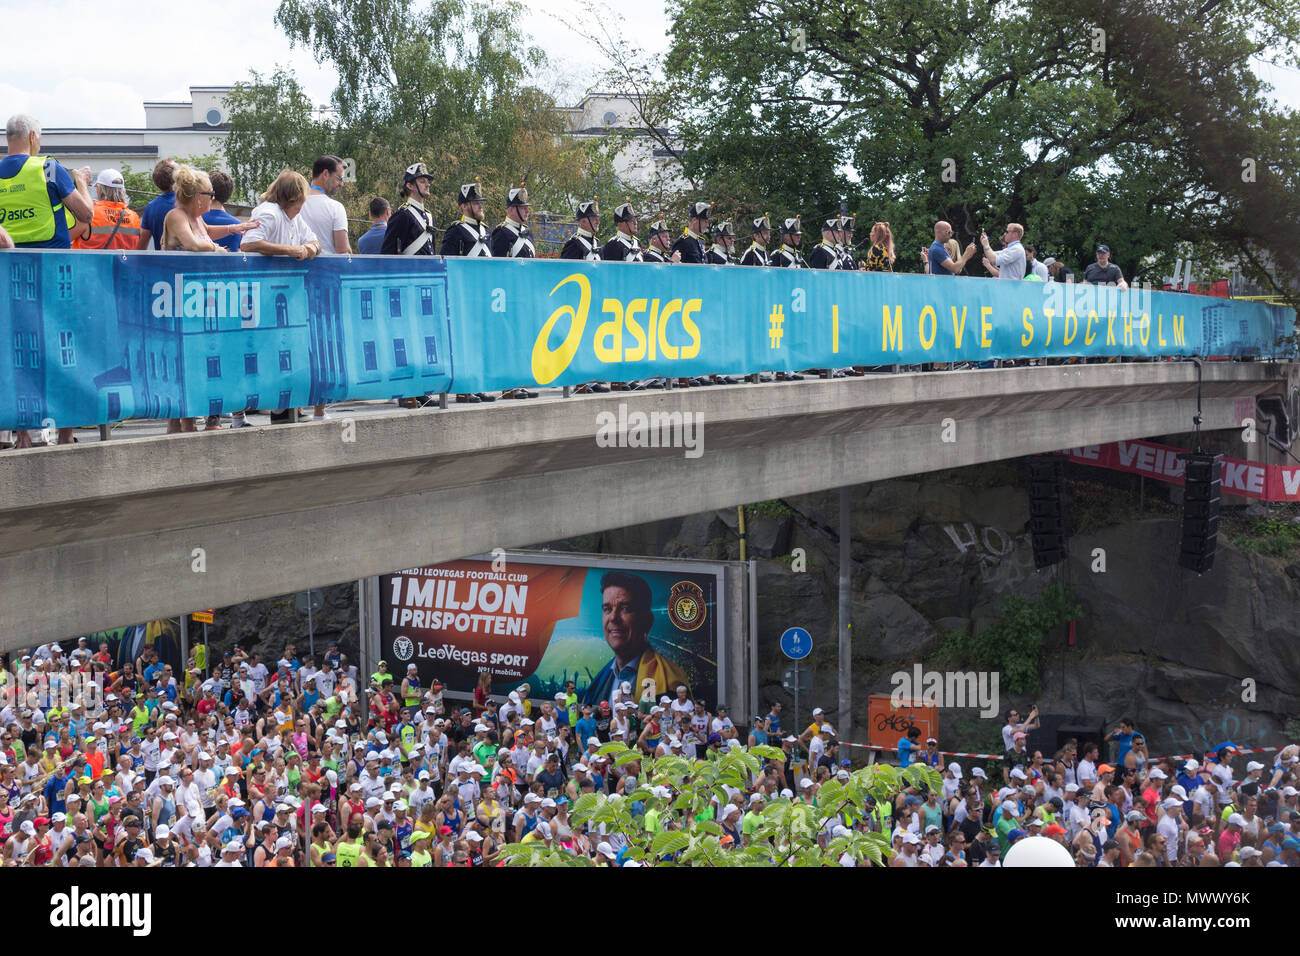 ASICS Stockholm (STHLM) Marathon 2018. Wide view of The musketeers of the  Royal Life guards Infantry of Sweden, on the bridge, waiting for the signal  to fire blank shots and mark the